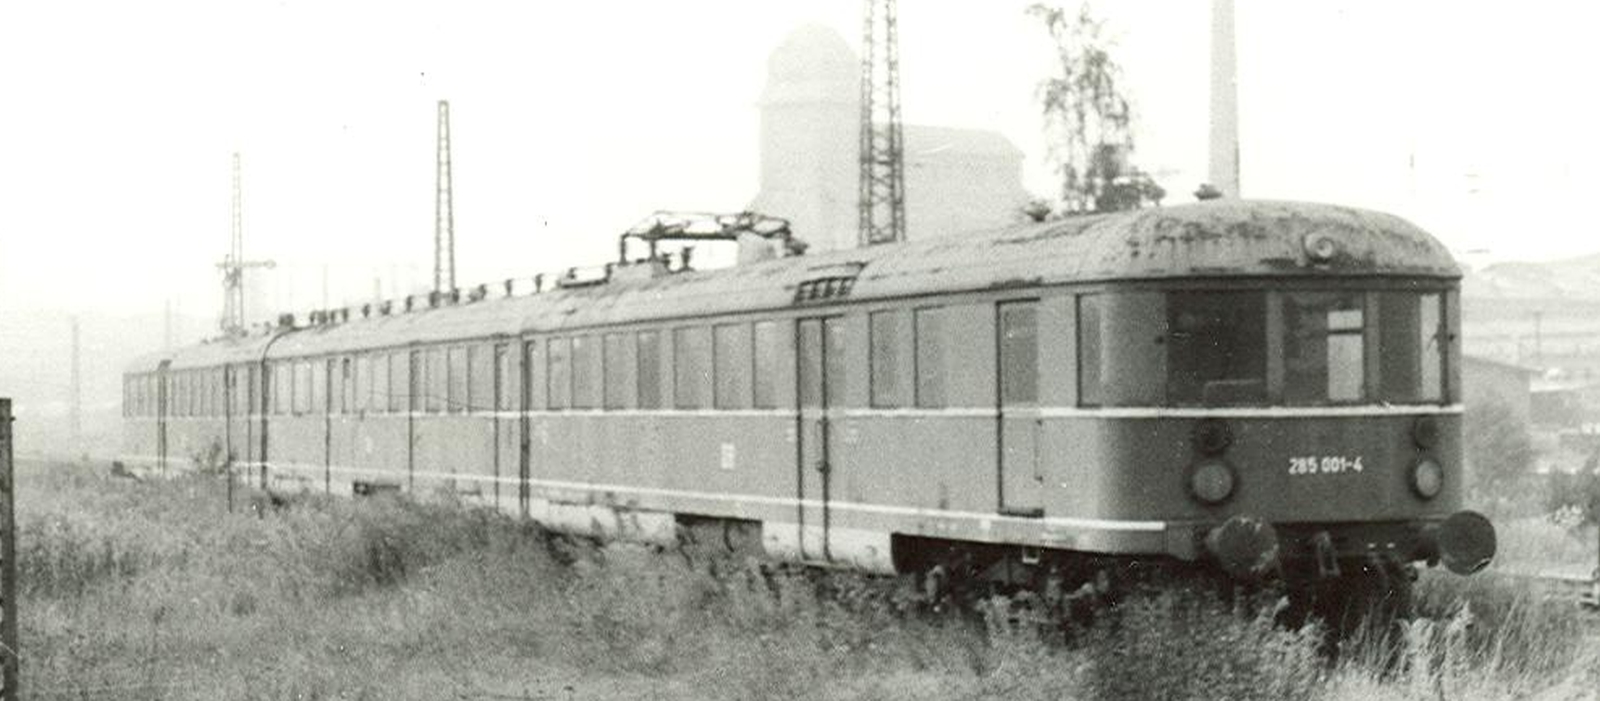 ET 25 012 with the original ends in the GDR after it was decommissioned